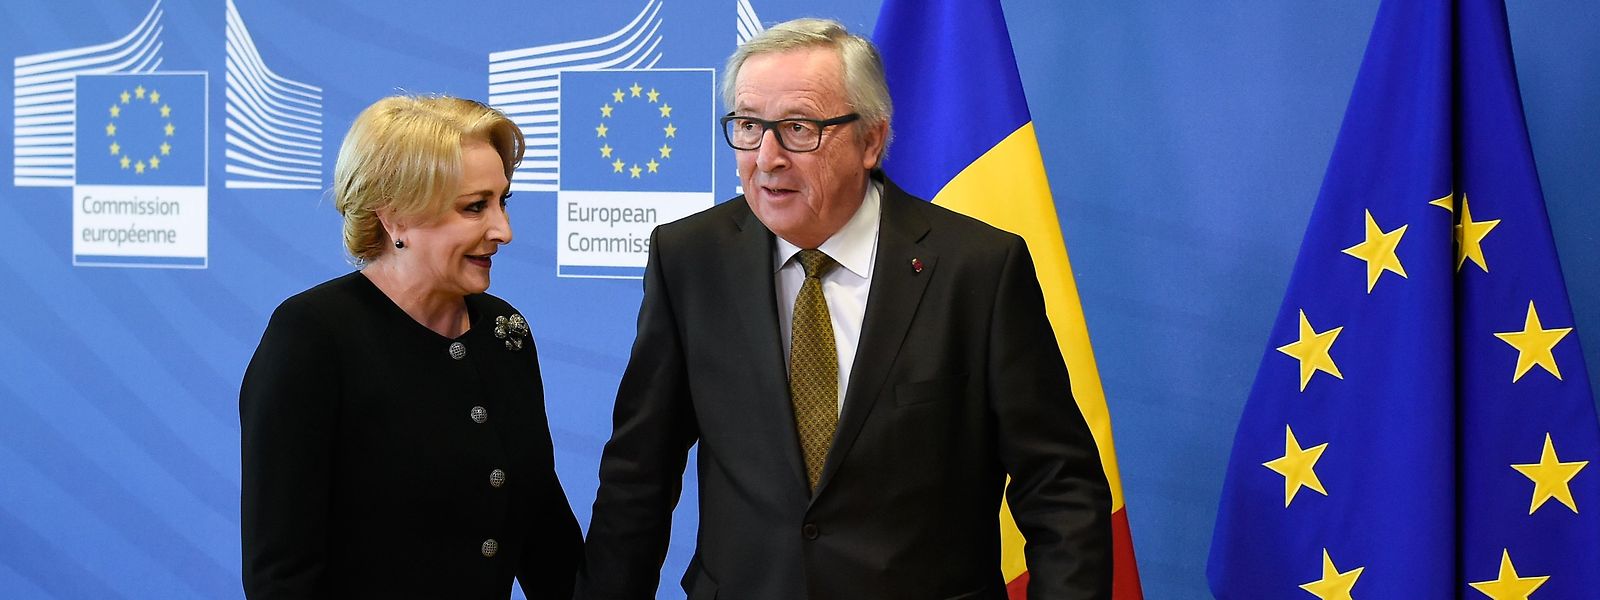 Jean-Claude Juncker zusammen mit der rumänischen Ministerpräsidentin Viorica Dancila before their bilateral meeting at the EU headquarters in Brussels. - In an interview published on December 29, 2018 in Germany's daily newspaper "Die Welt", Juncker expressed his doubts on Romania's aptitude to take over the EU presidency for the first six month of the year 2019. (Photo by JOHN THYS / AFP)